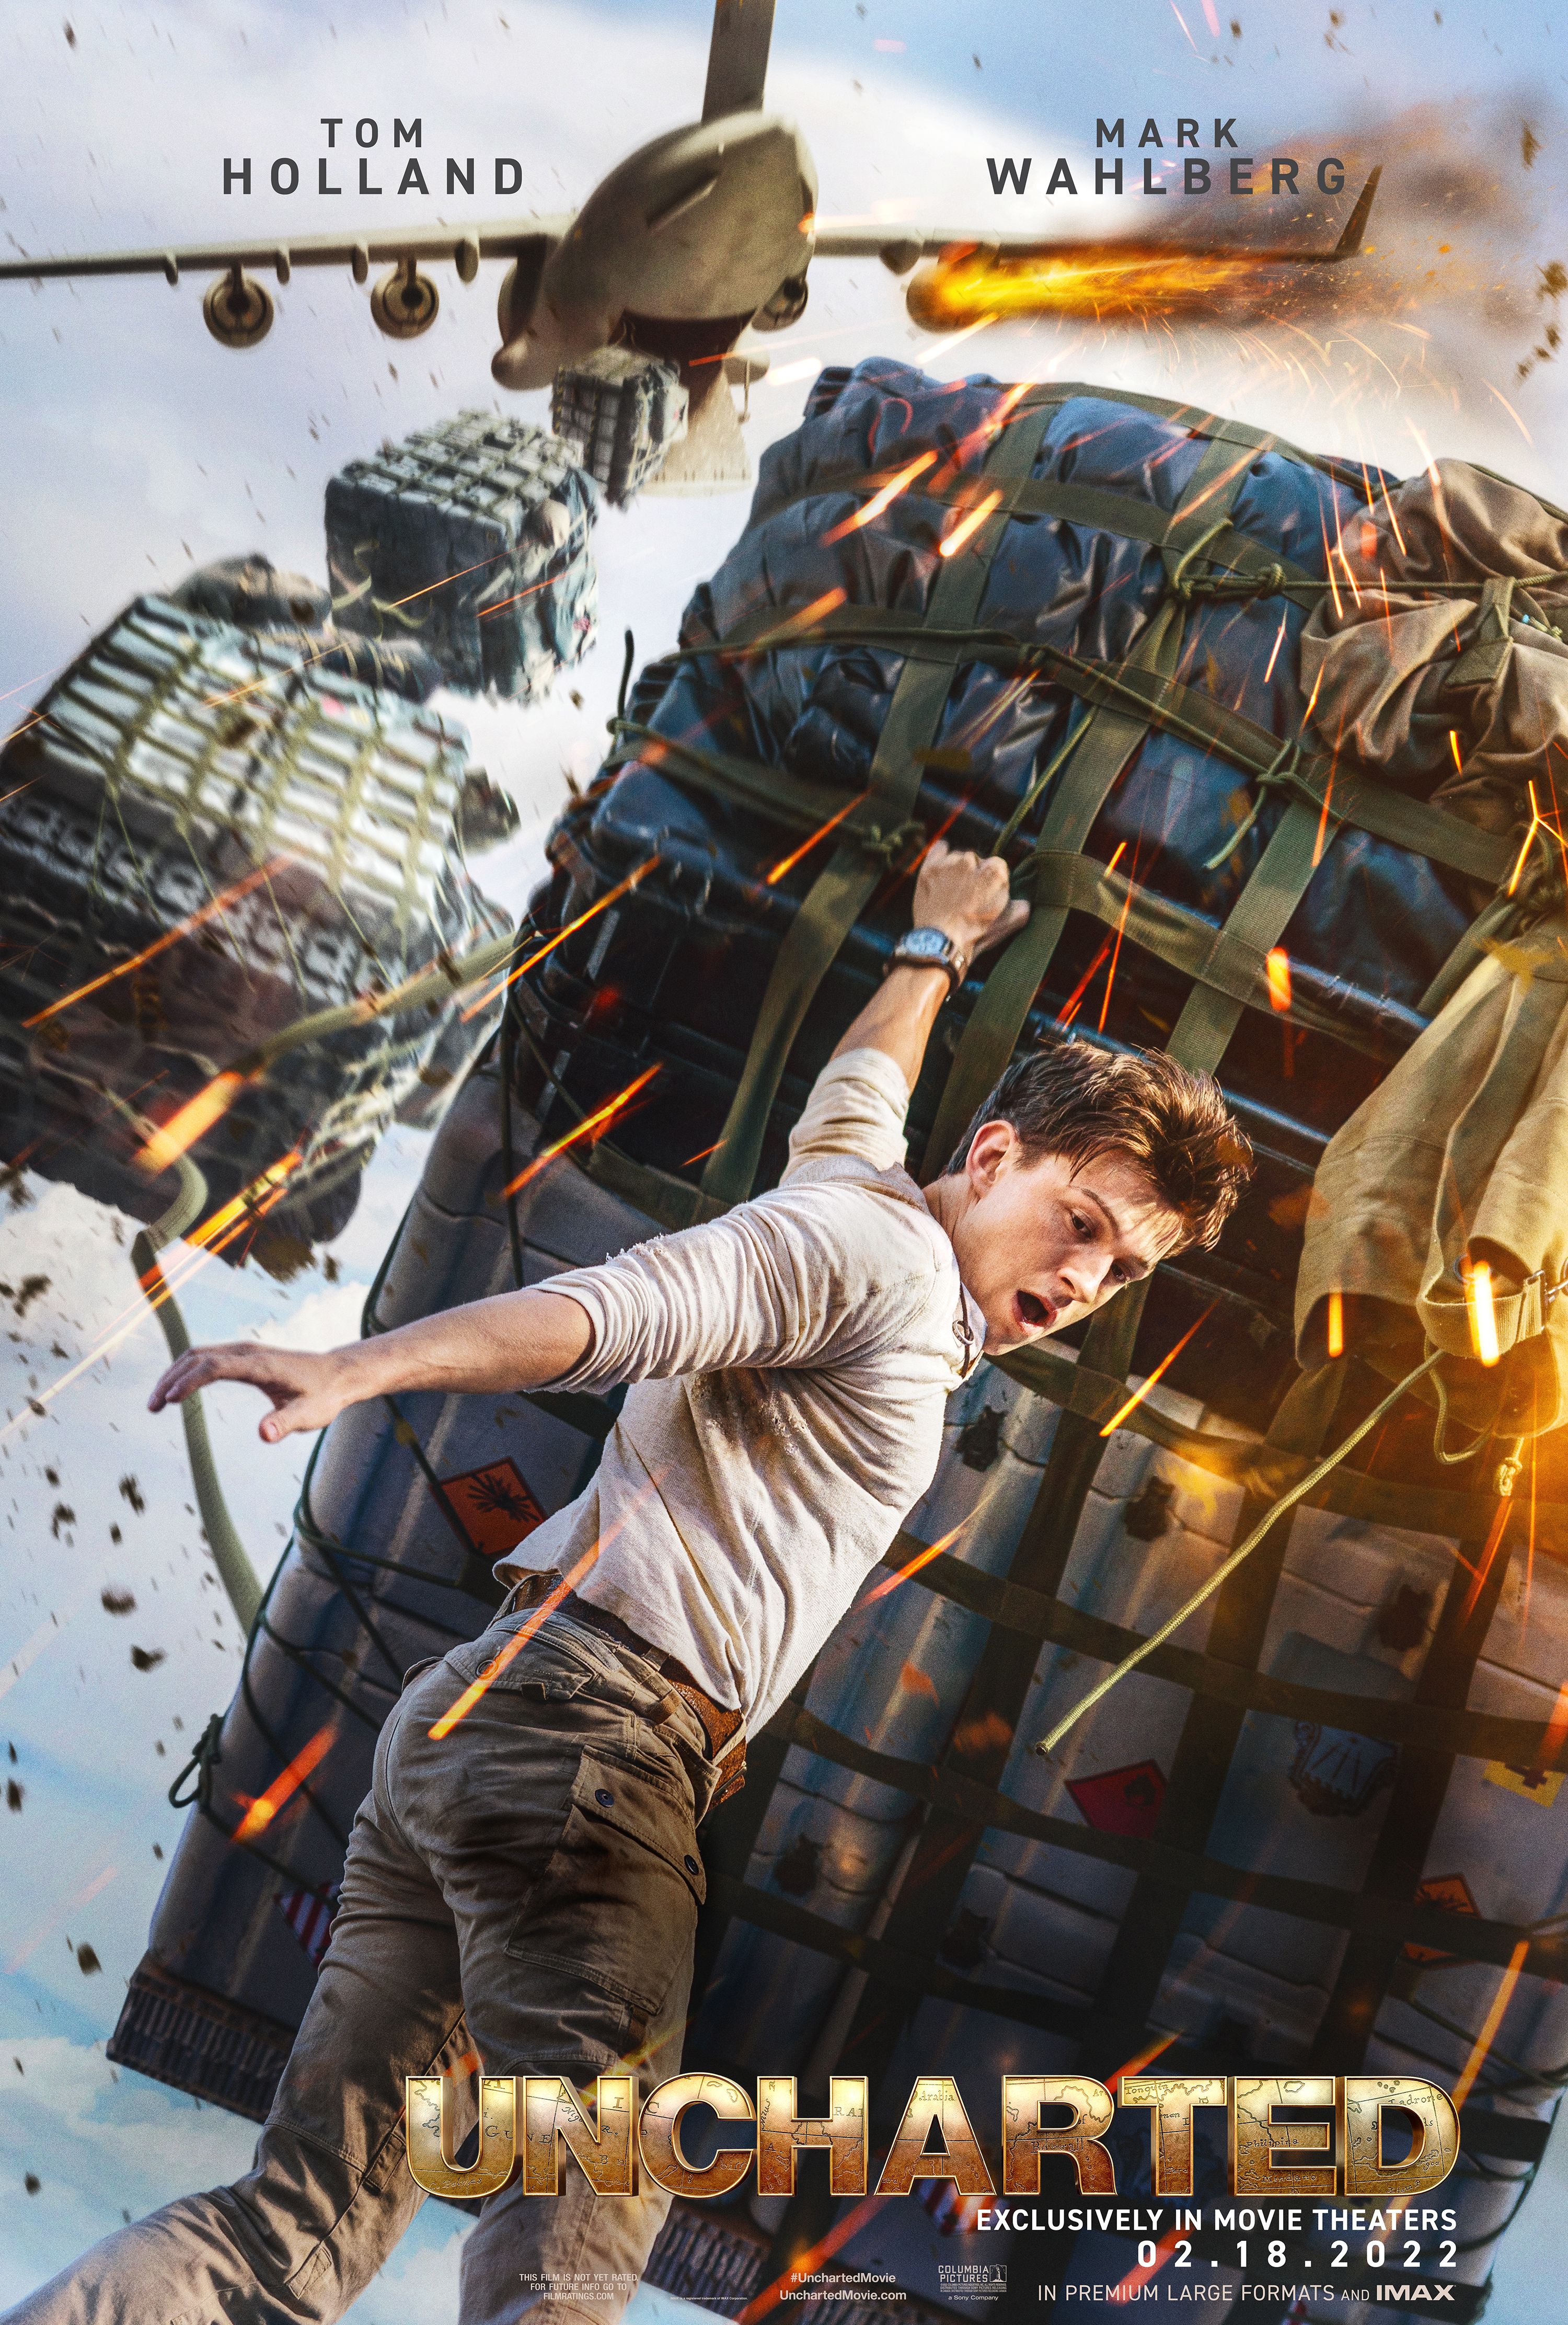 Tom Holland in Uncharted Poster